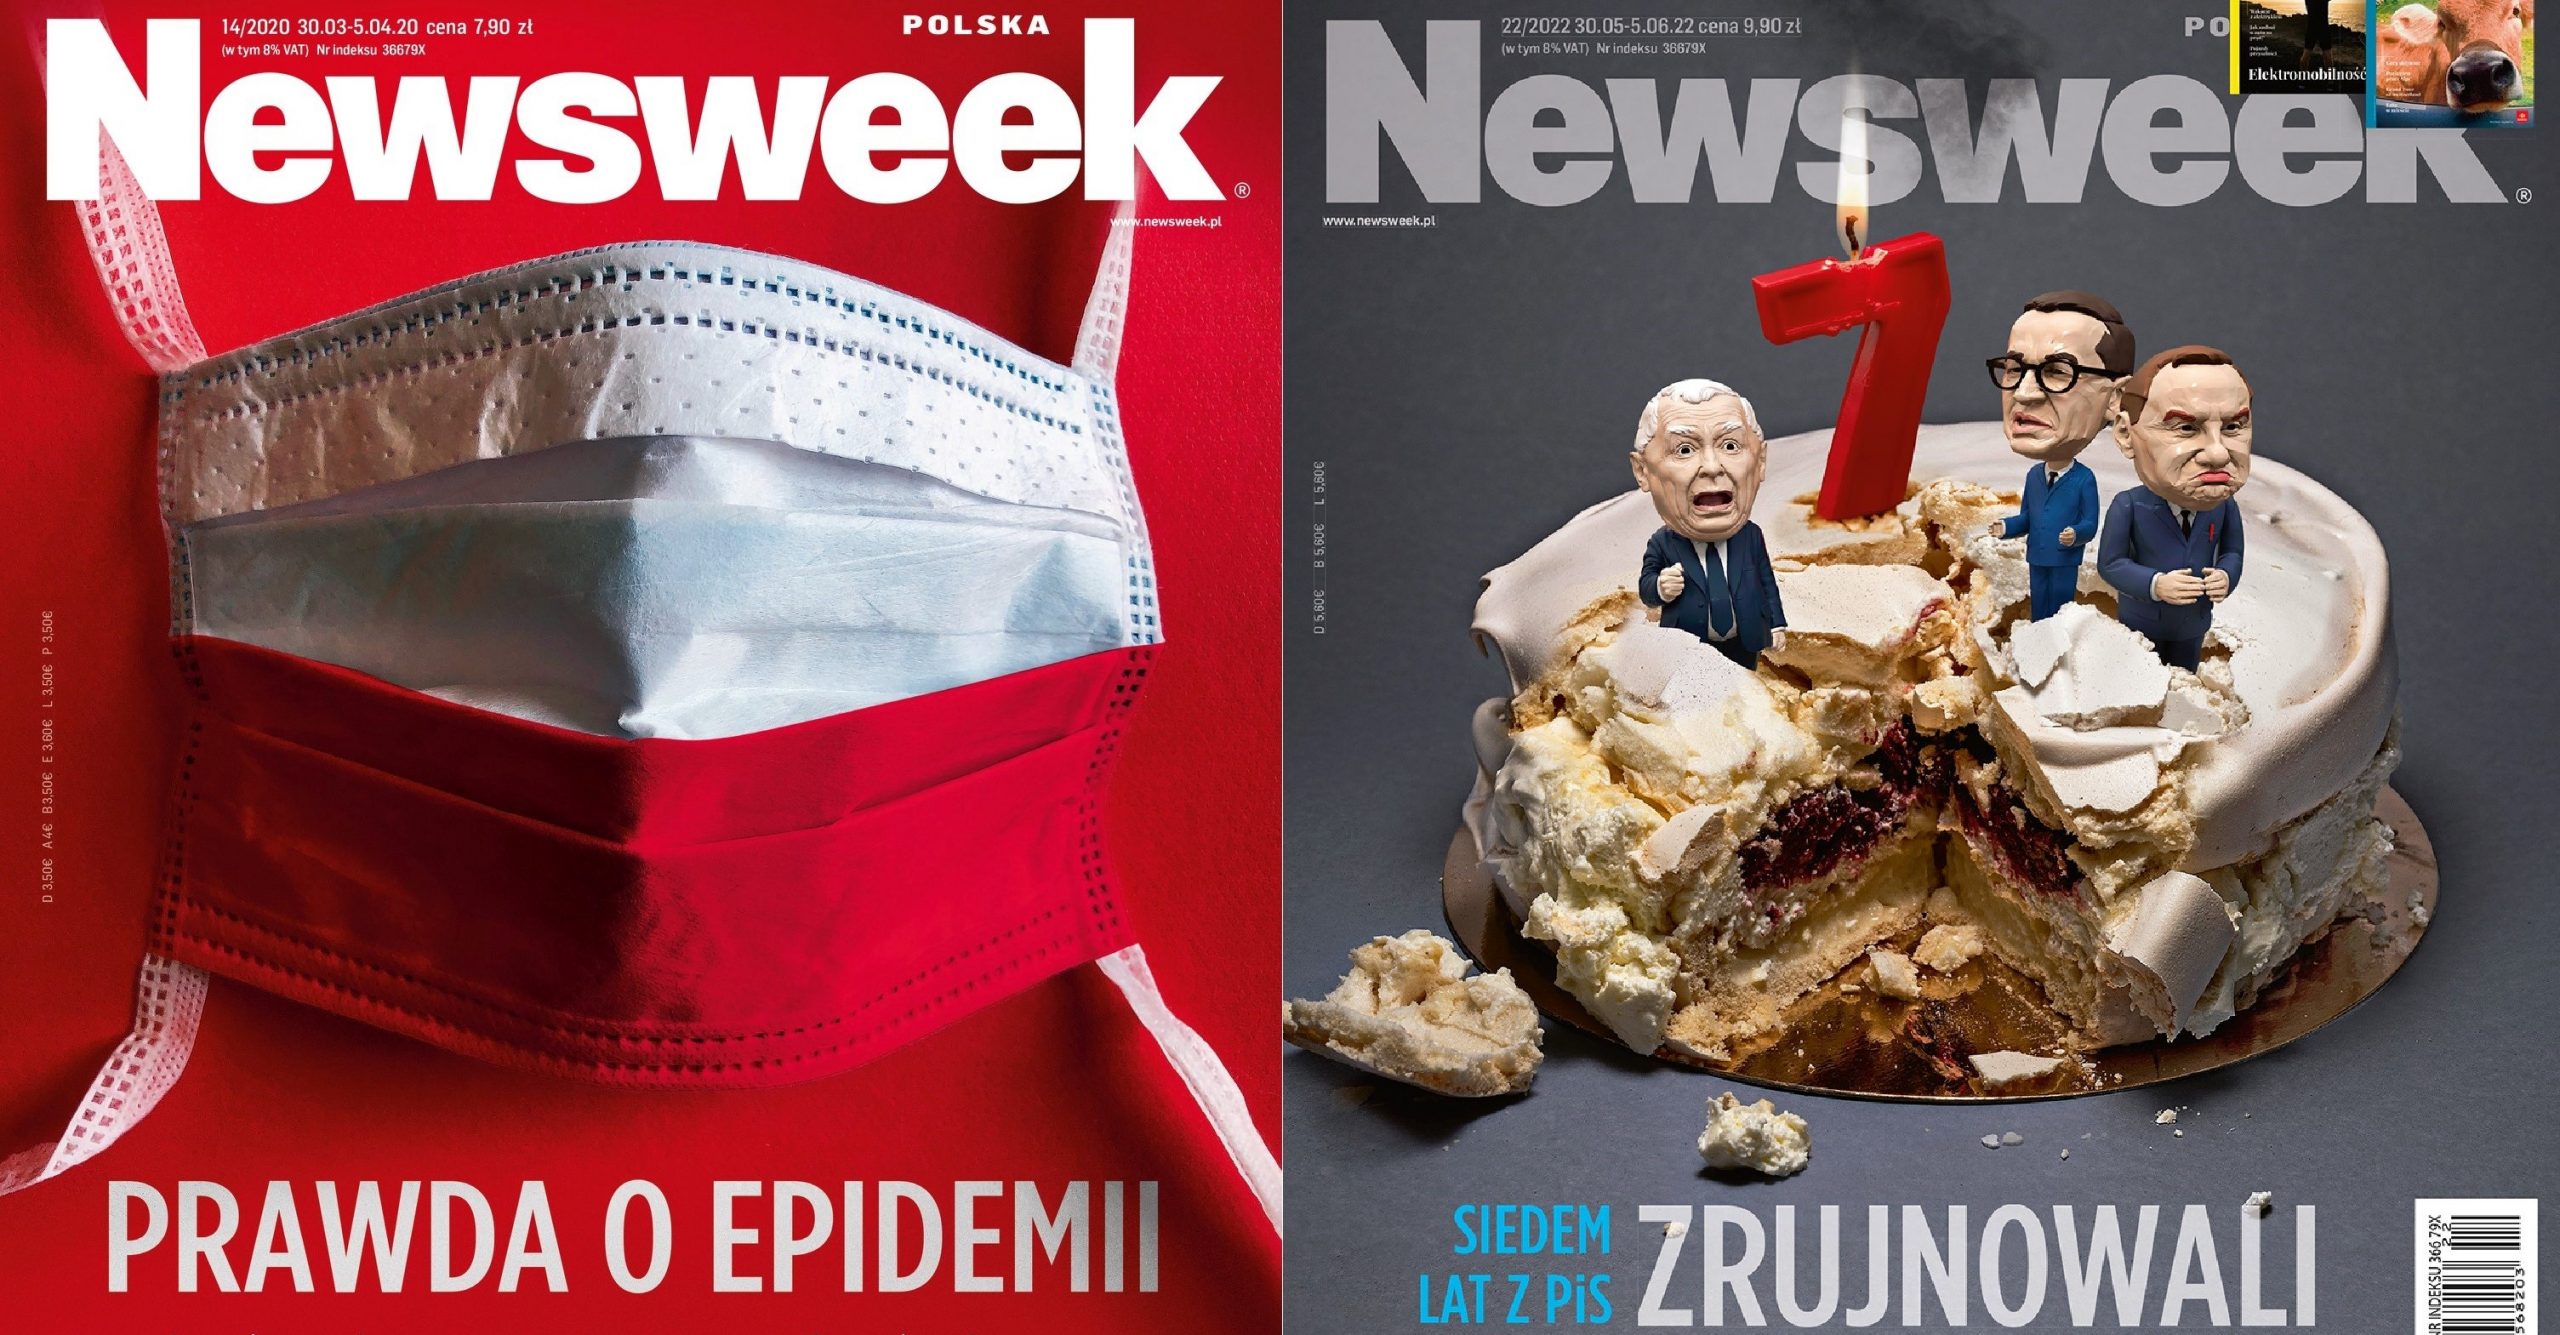 Polish Newsweek hit by accusations of bullying by long-serving former editor-in-chief Notes From Poland image